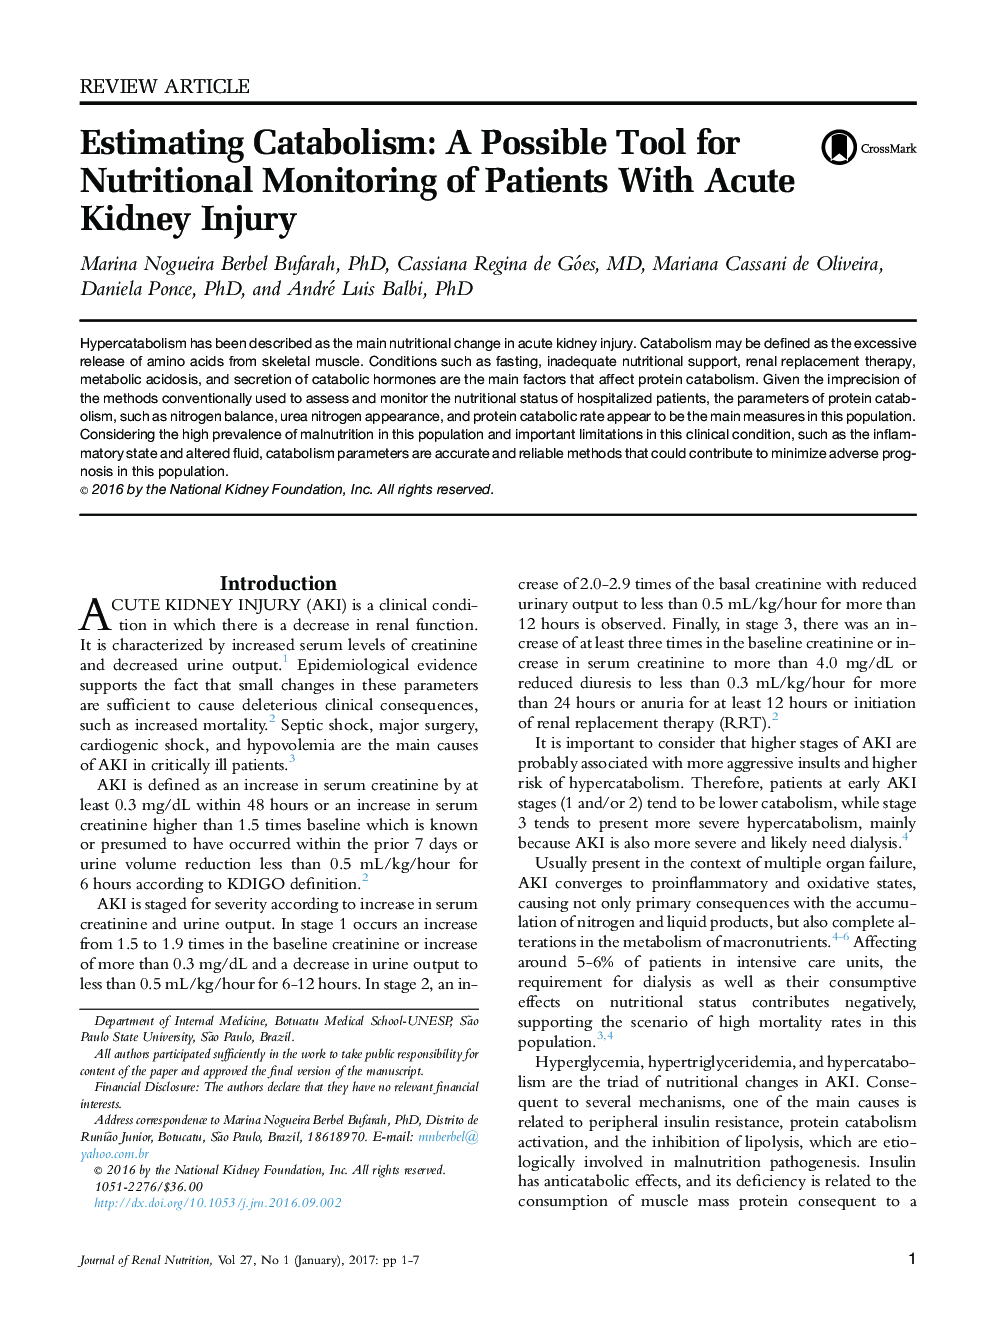 Estimating Catabolism: A Possible Tool for Nutritional Monitoring of Patients With Acute Kidney Injury